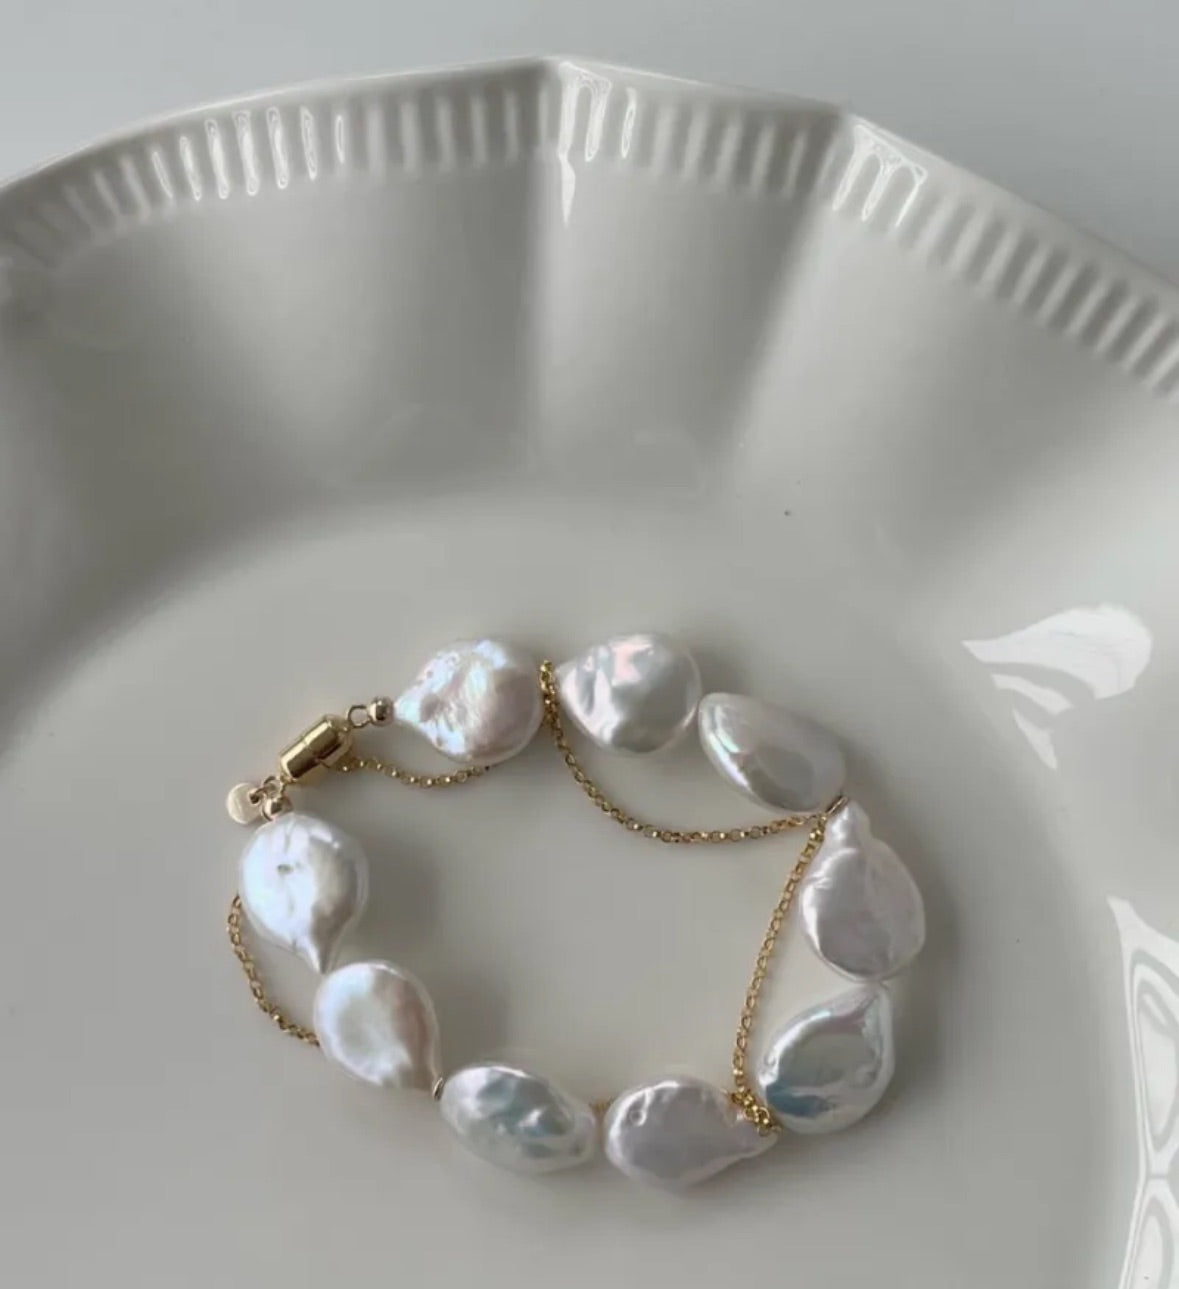 Baroque Pearls Bracelets with Freshwater Pearls, Natural Pearl Bracelet.